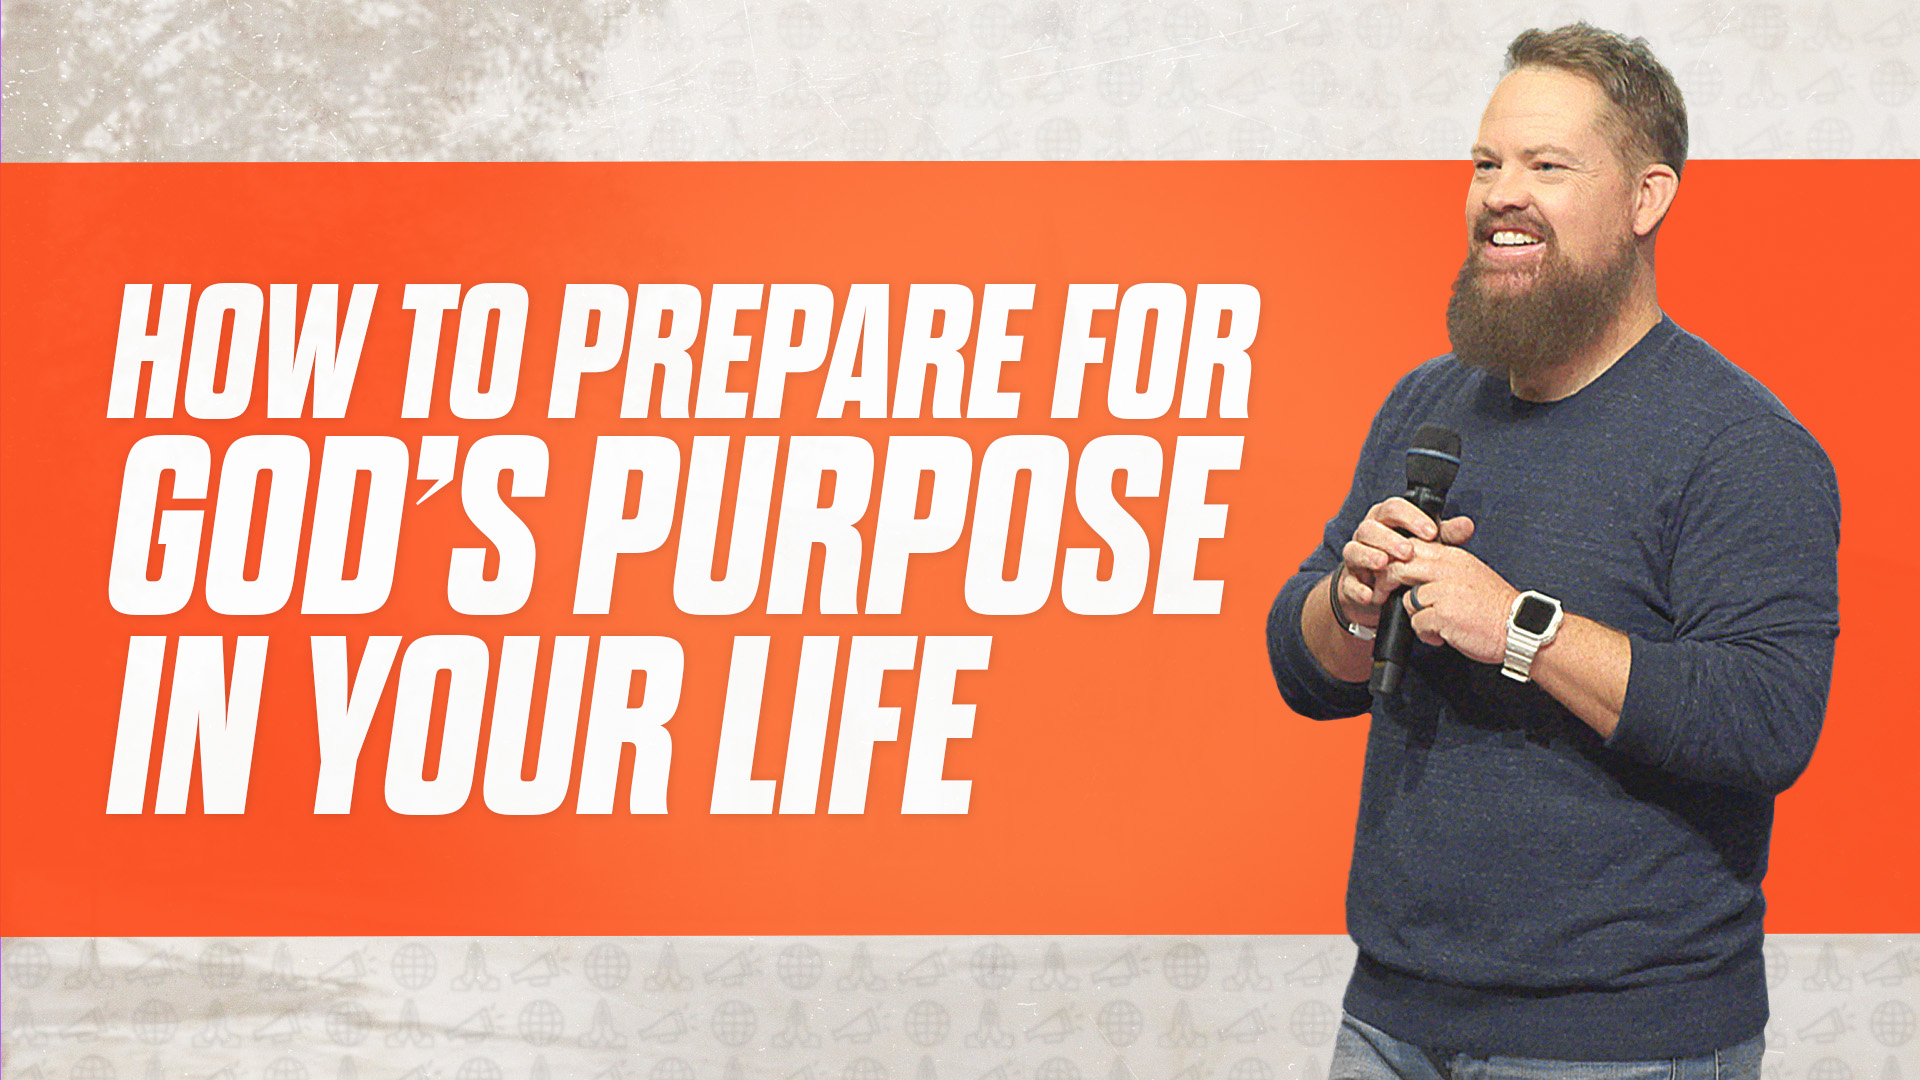 How To Prepare For God's Purpose In Your Life